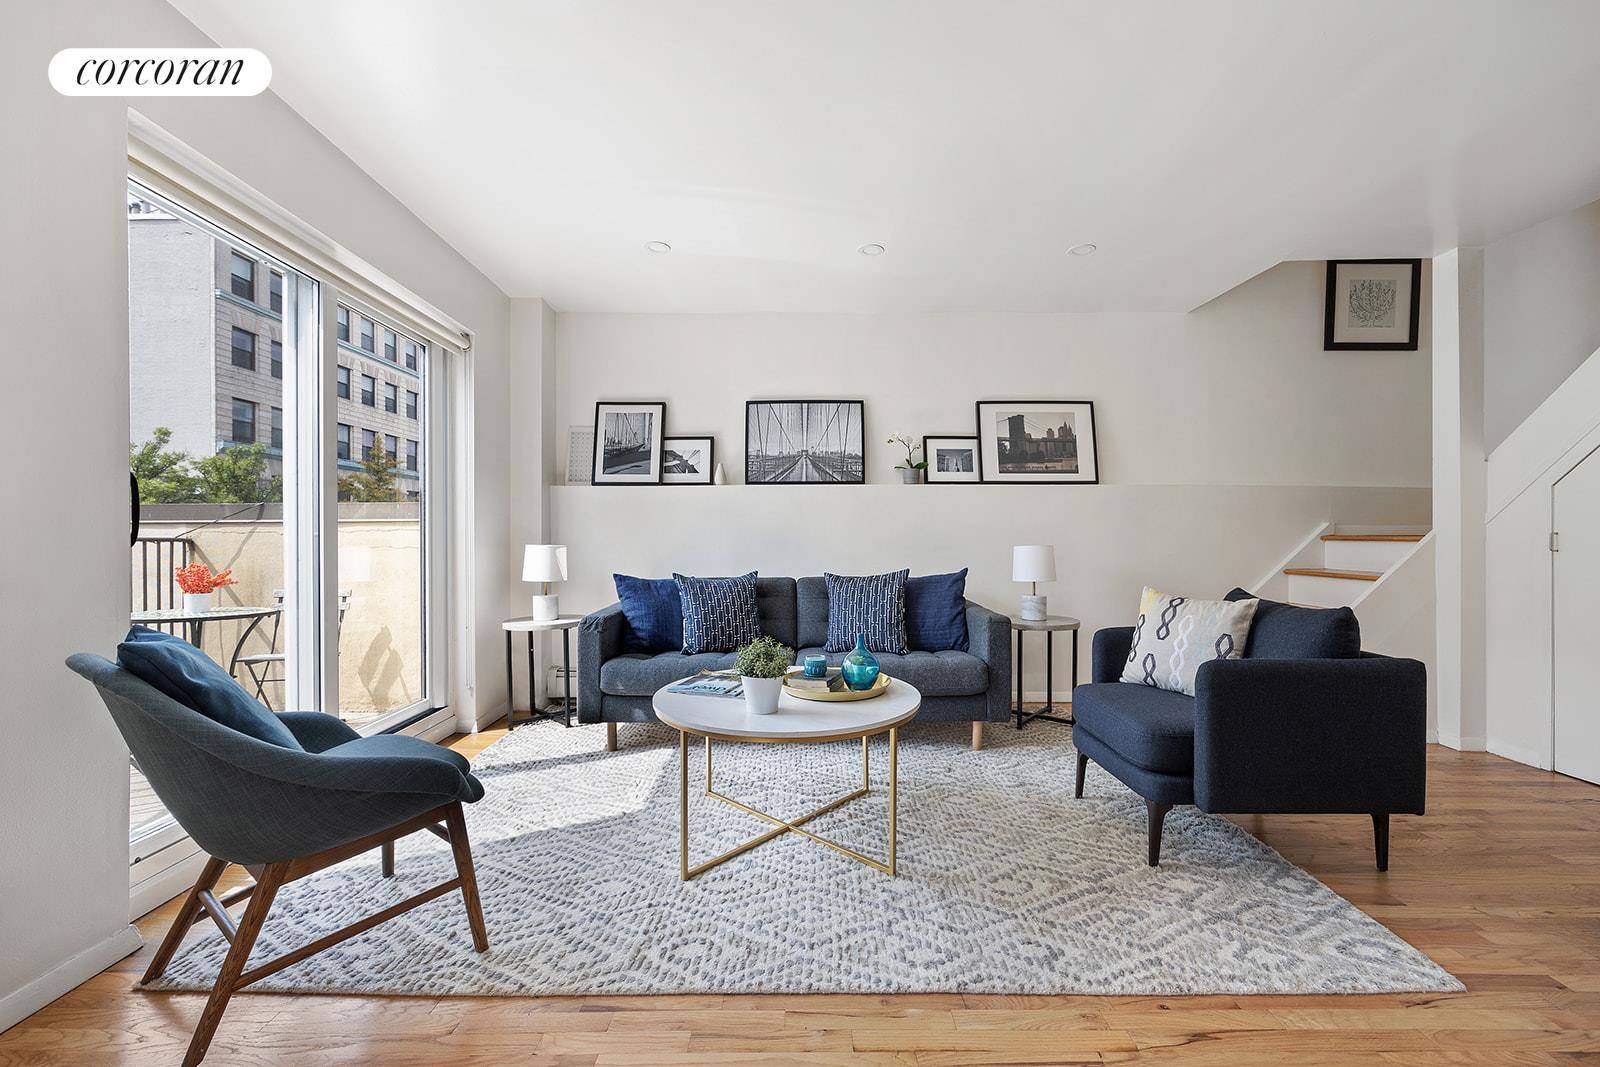 Located at the crossroads of Cobble Hill and Boerum Hill, 95 Wyckoff Street 2A is a spacious and bright two bedroom duplex apartment, perfectly designed with the living space on ...